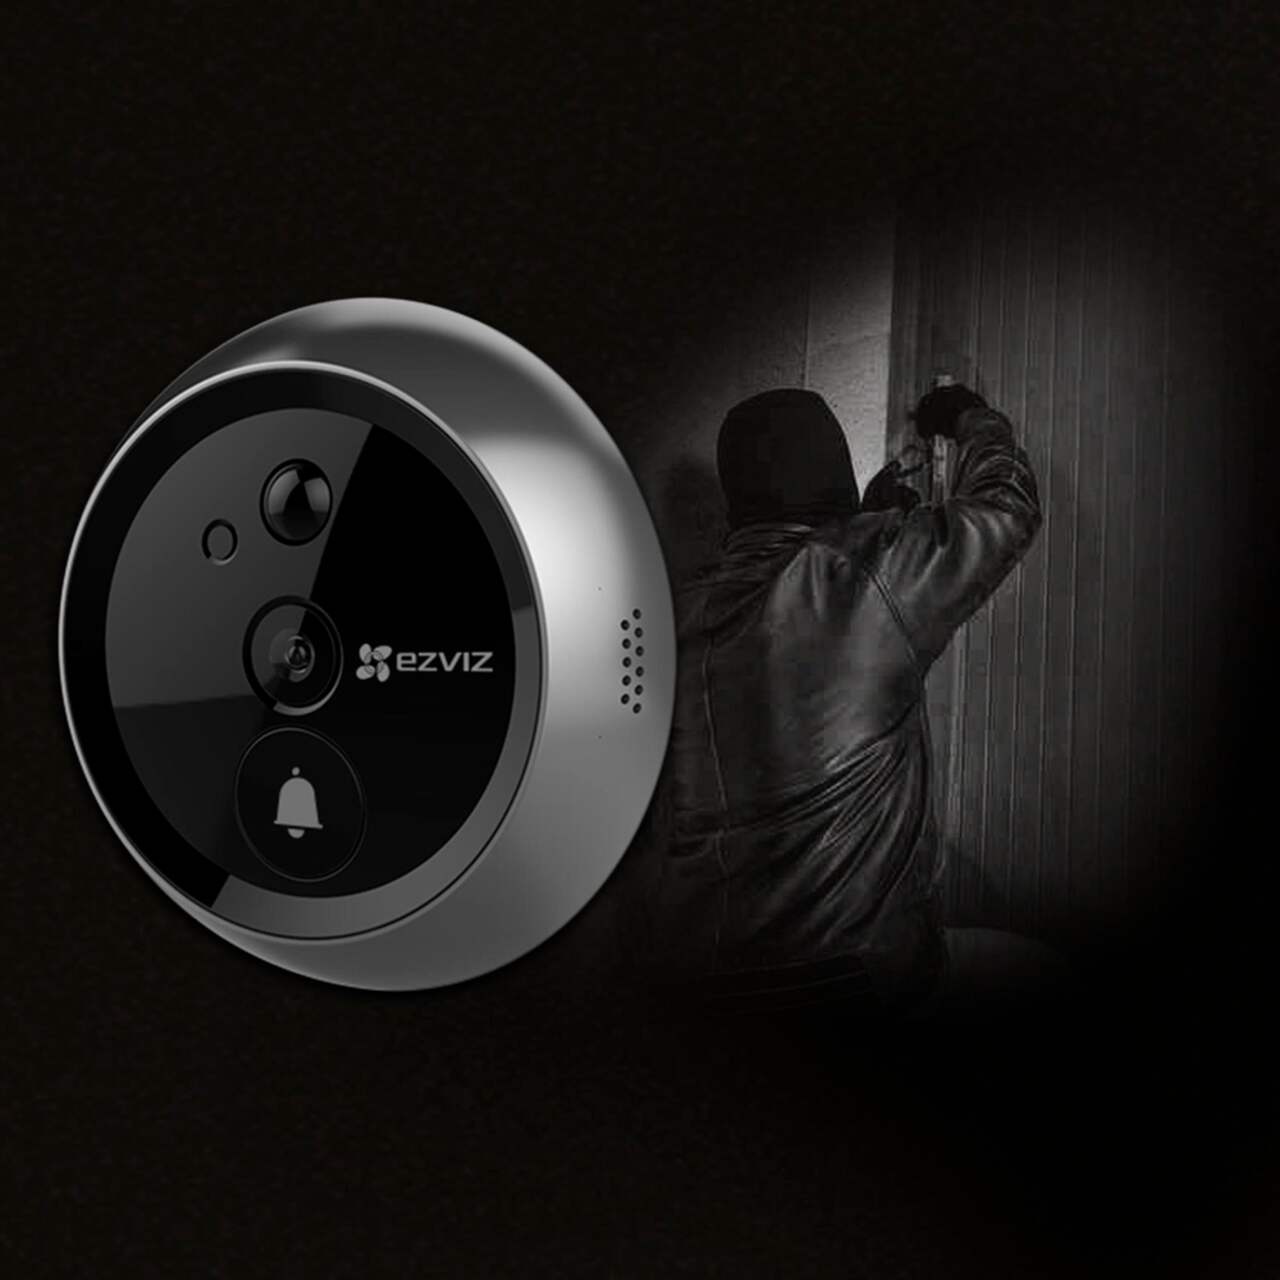 EZVIZ launches all-new battery-powered smart security products in Canada,  making home protection smarter and easier than ever 